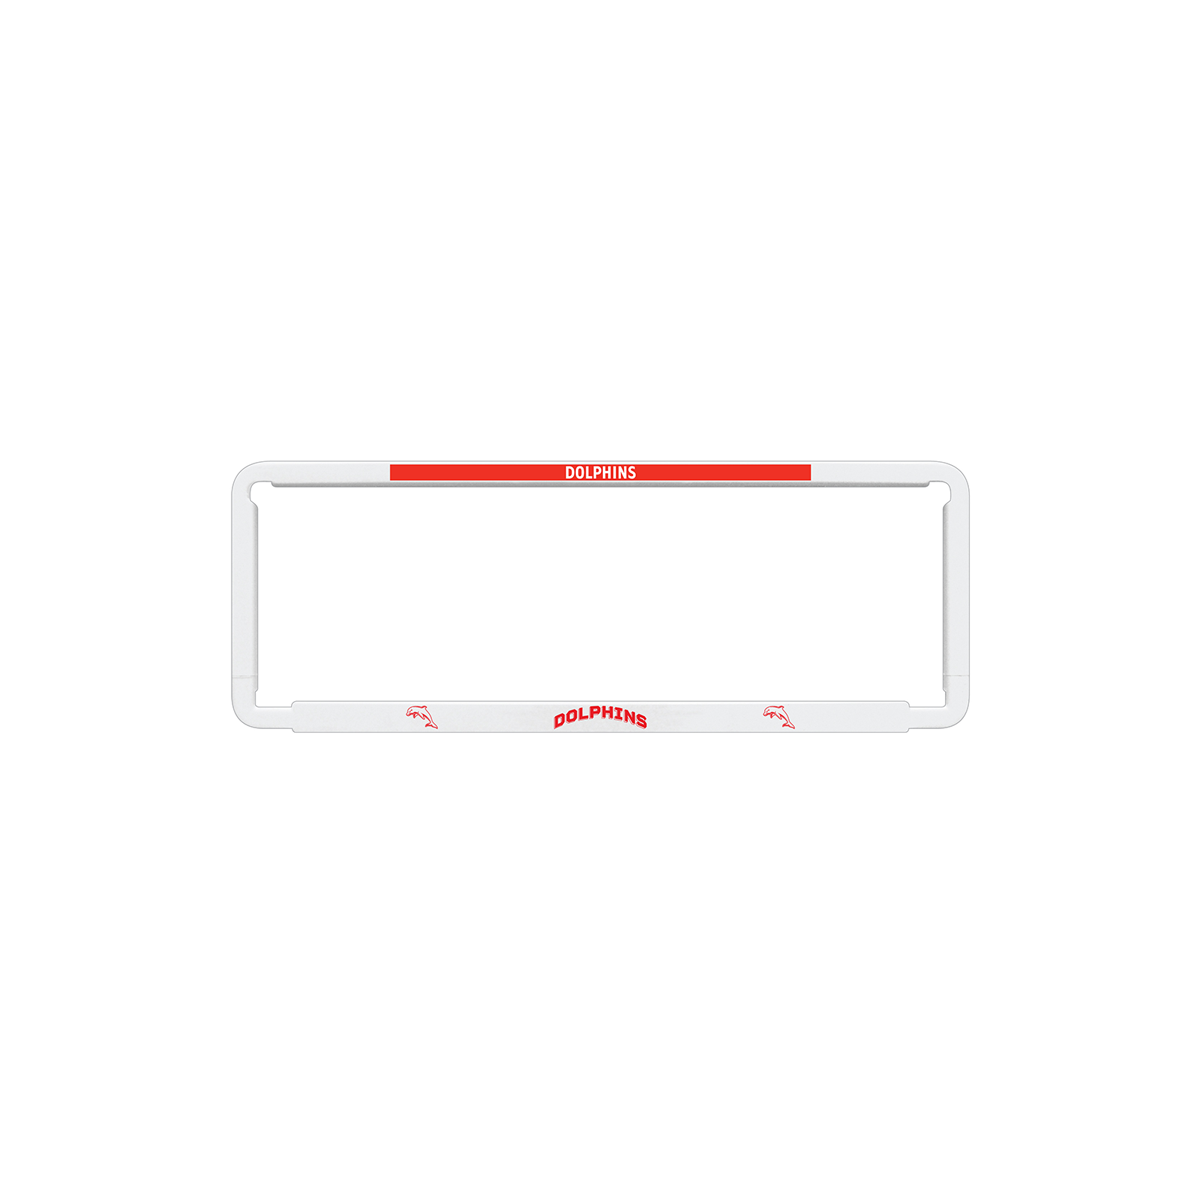 Dolphins NRL Number Plate Cover